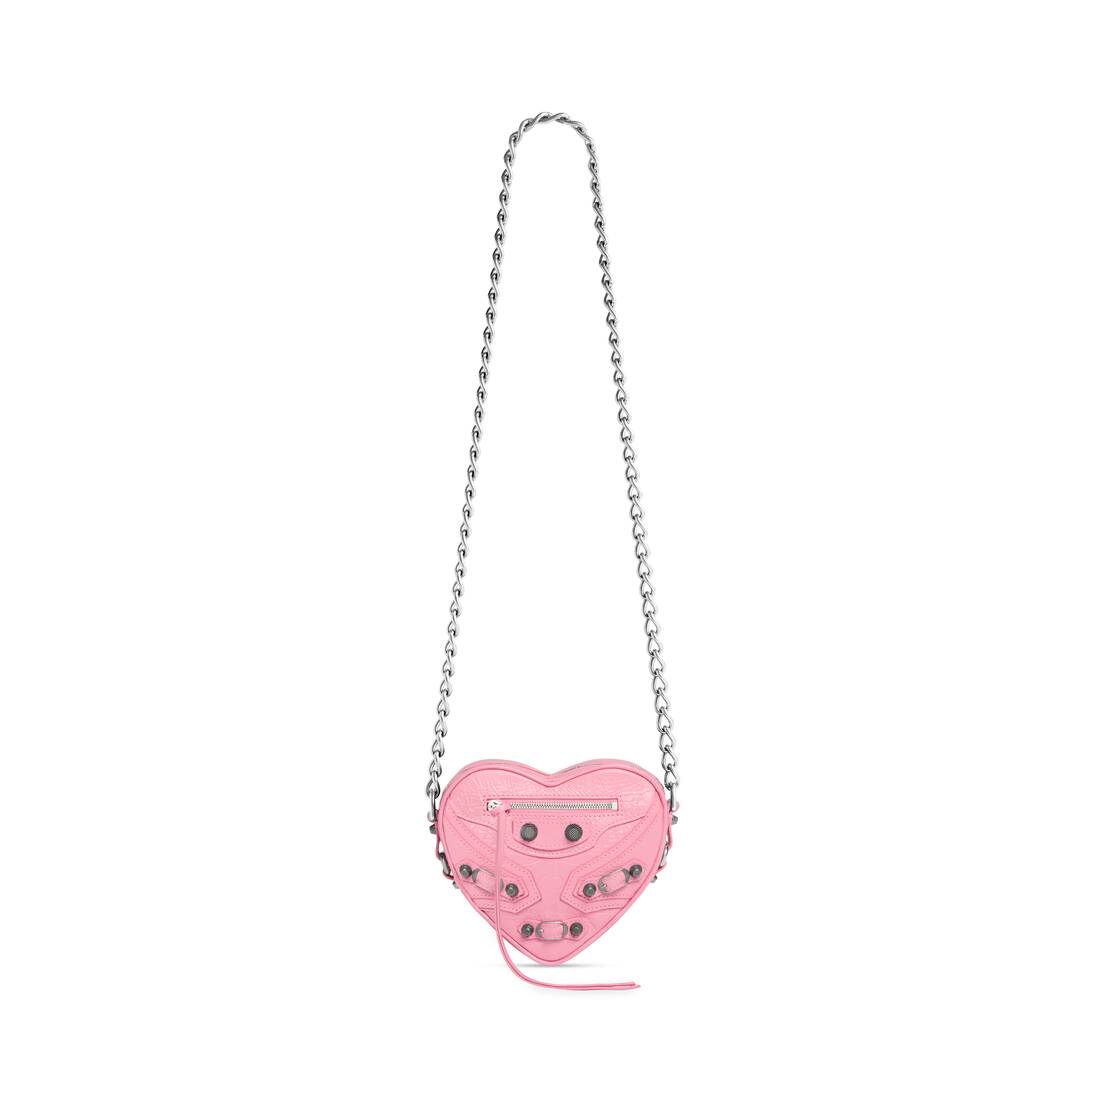 Heart Shaped Crossbody Bag With Floral Embroidery | Little Luxuries Designs